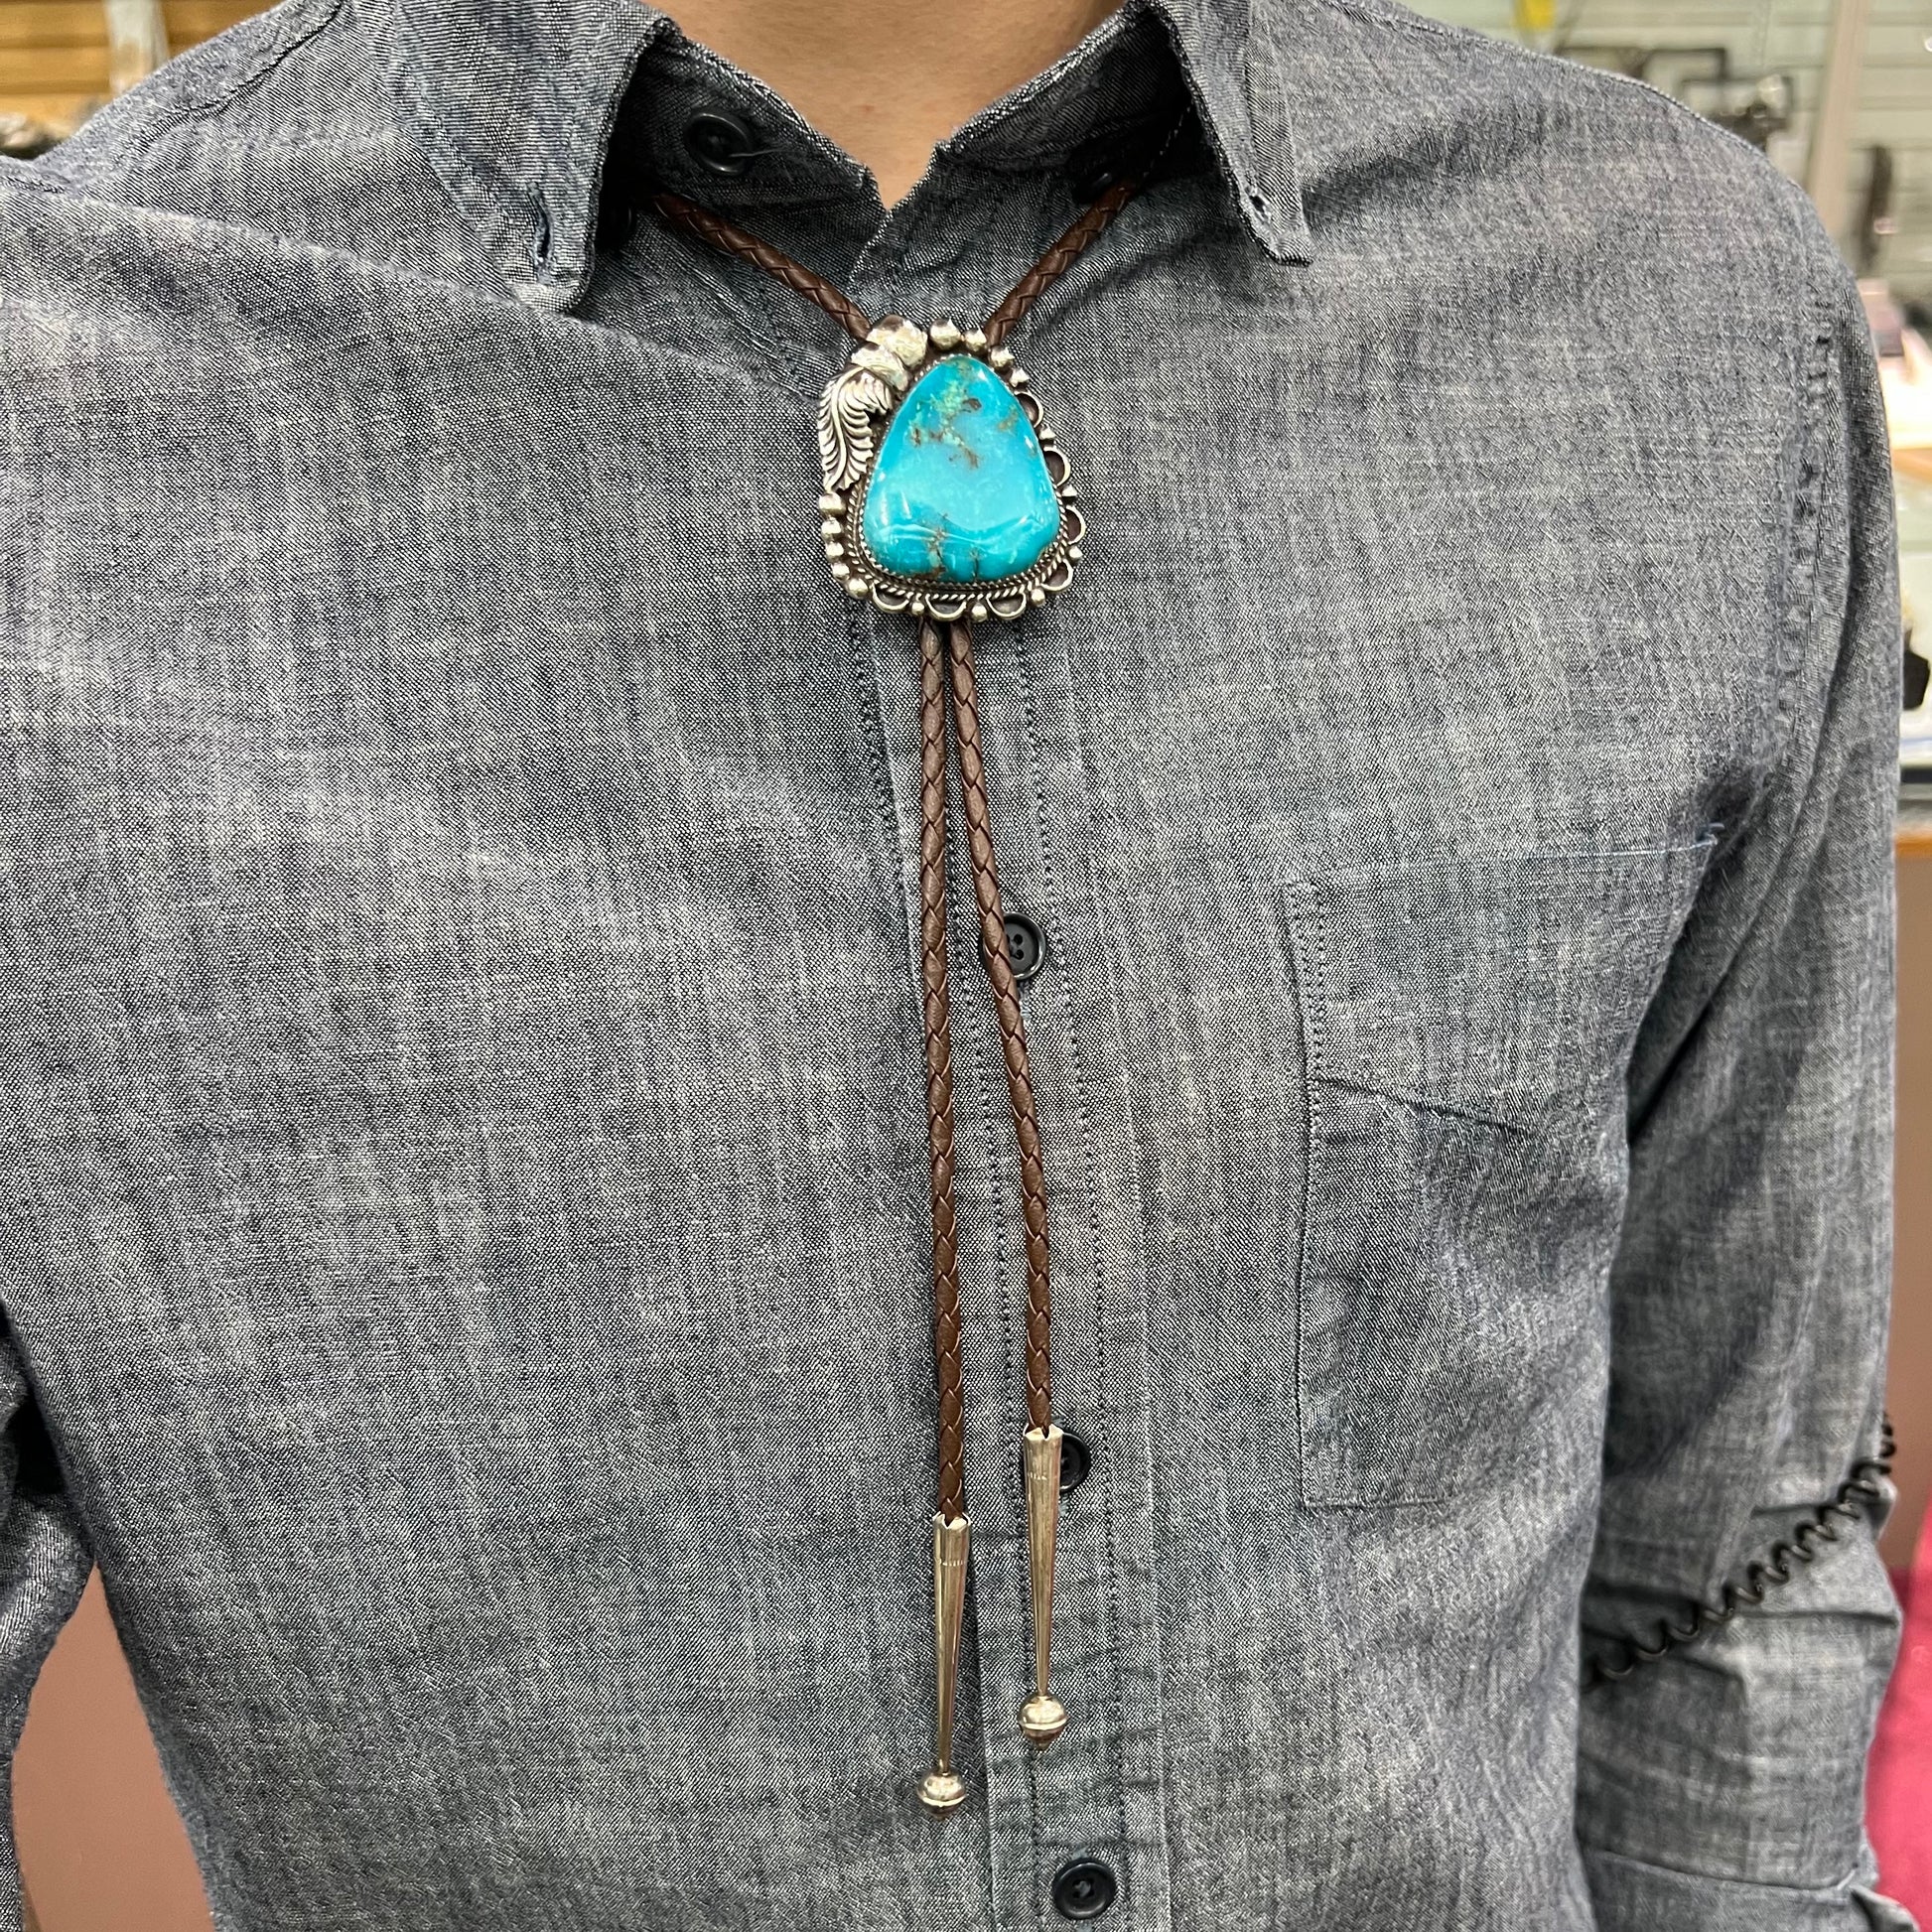 A men's sterling silver, Navajo style bolo tie set with a Pilot Mountain turquoise stone.  The rope is brown leather.